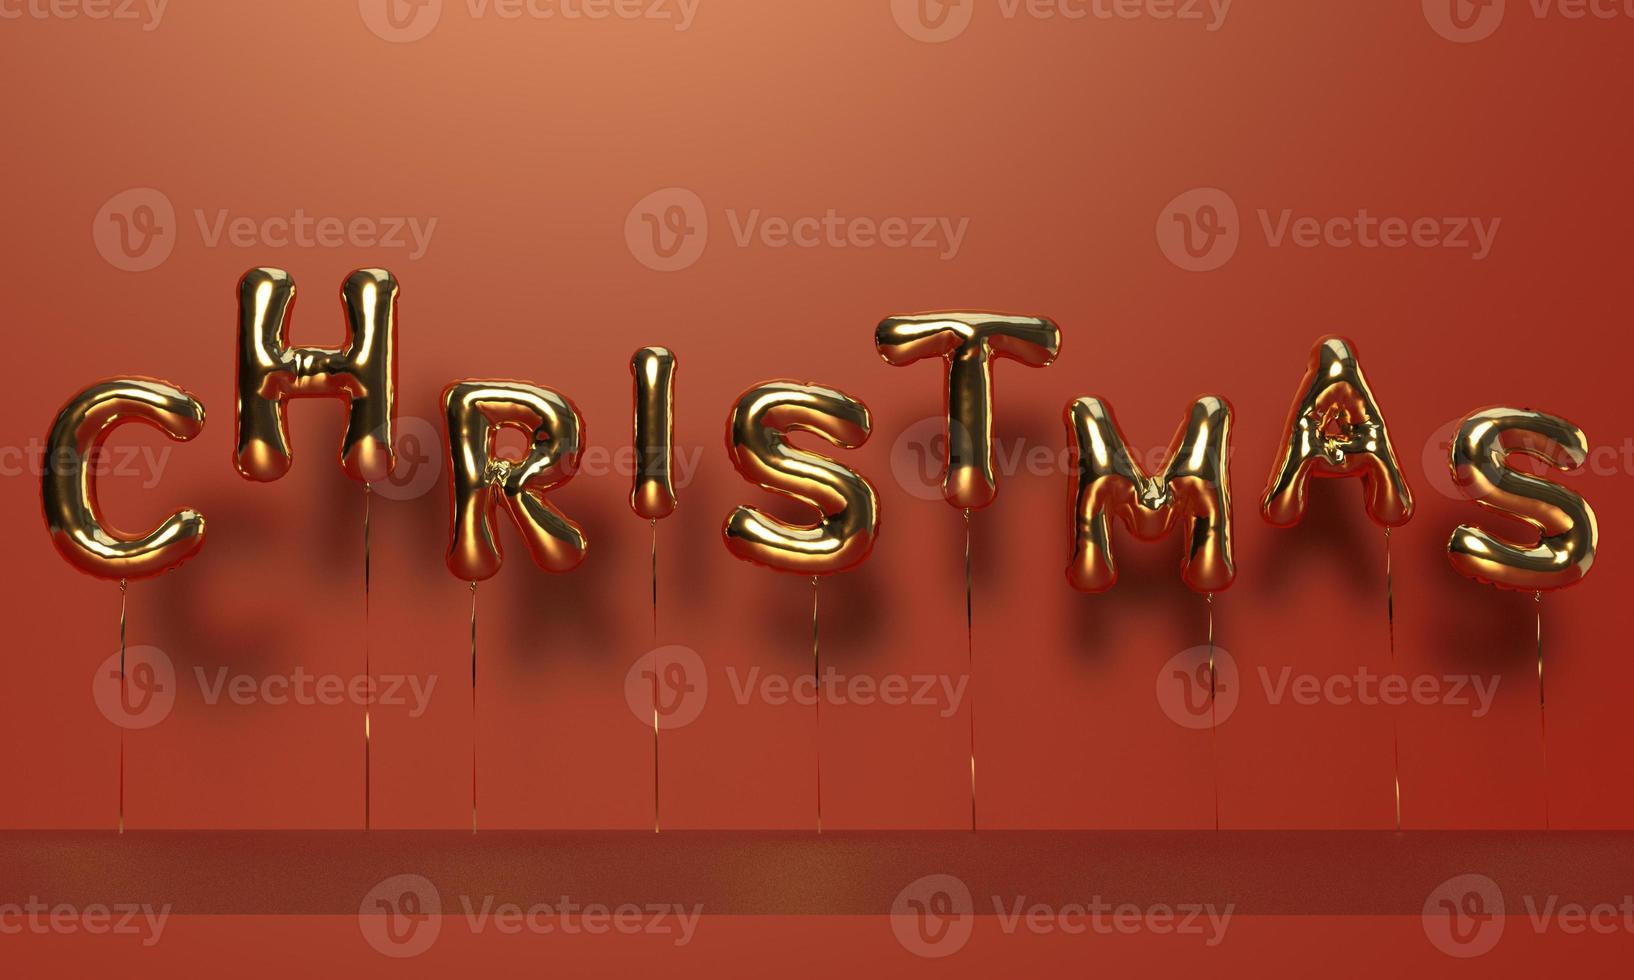 Balloon christmas golden text font calligraphy symbol decoration ornament merry christmas 25 twenty five happy new year 31 thirty one day december winter season festival celebration event holiday photo